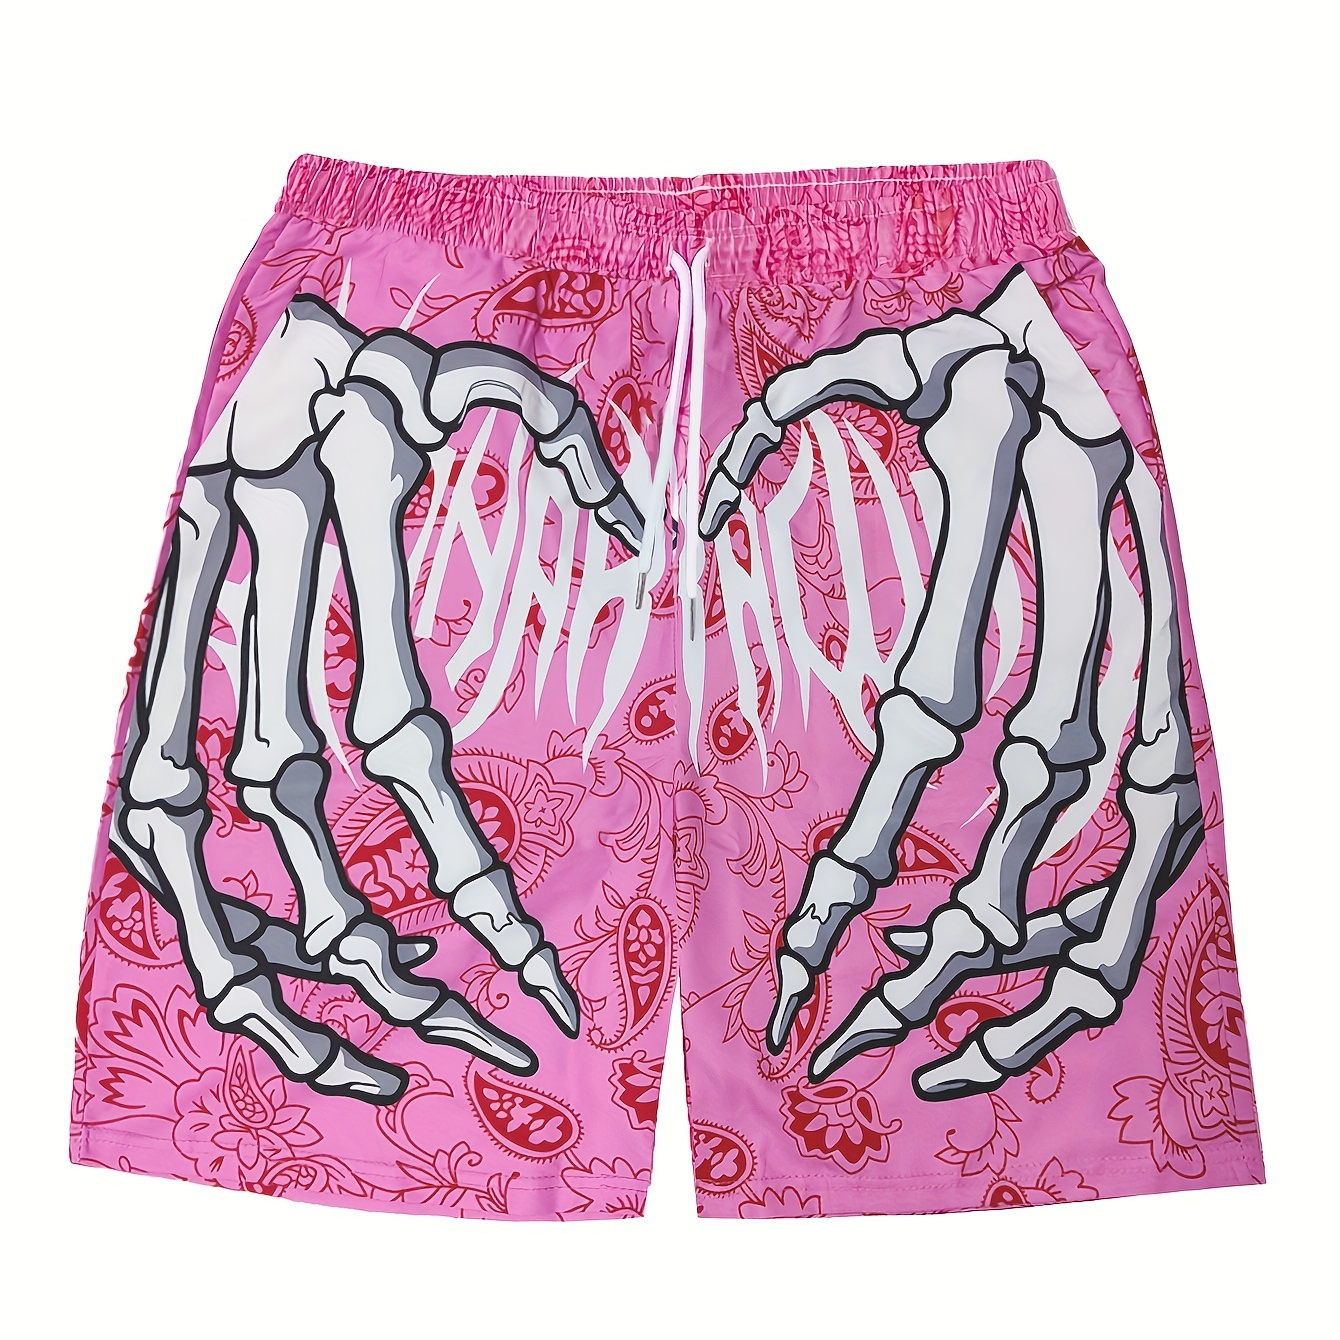 

Men's Paisley And Skeleton Hand Pattern And Alphabet Print Shorts With Drawstring And Pockets, Chic And Stylish Shorts For Summer Street Wear